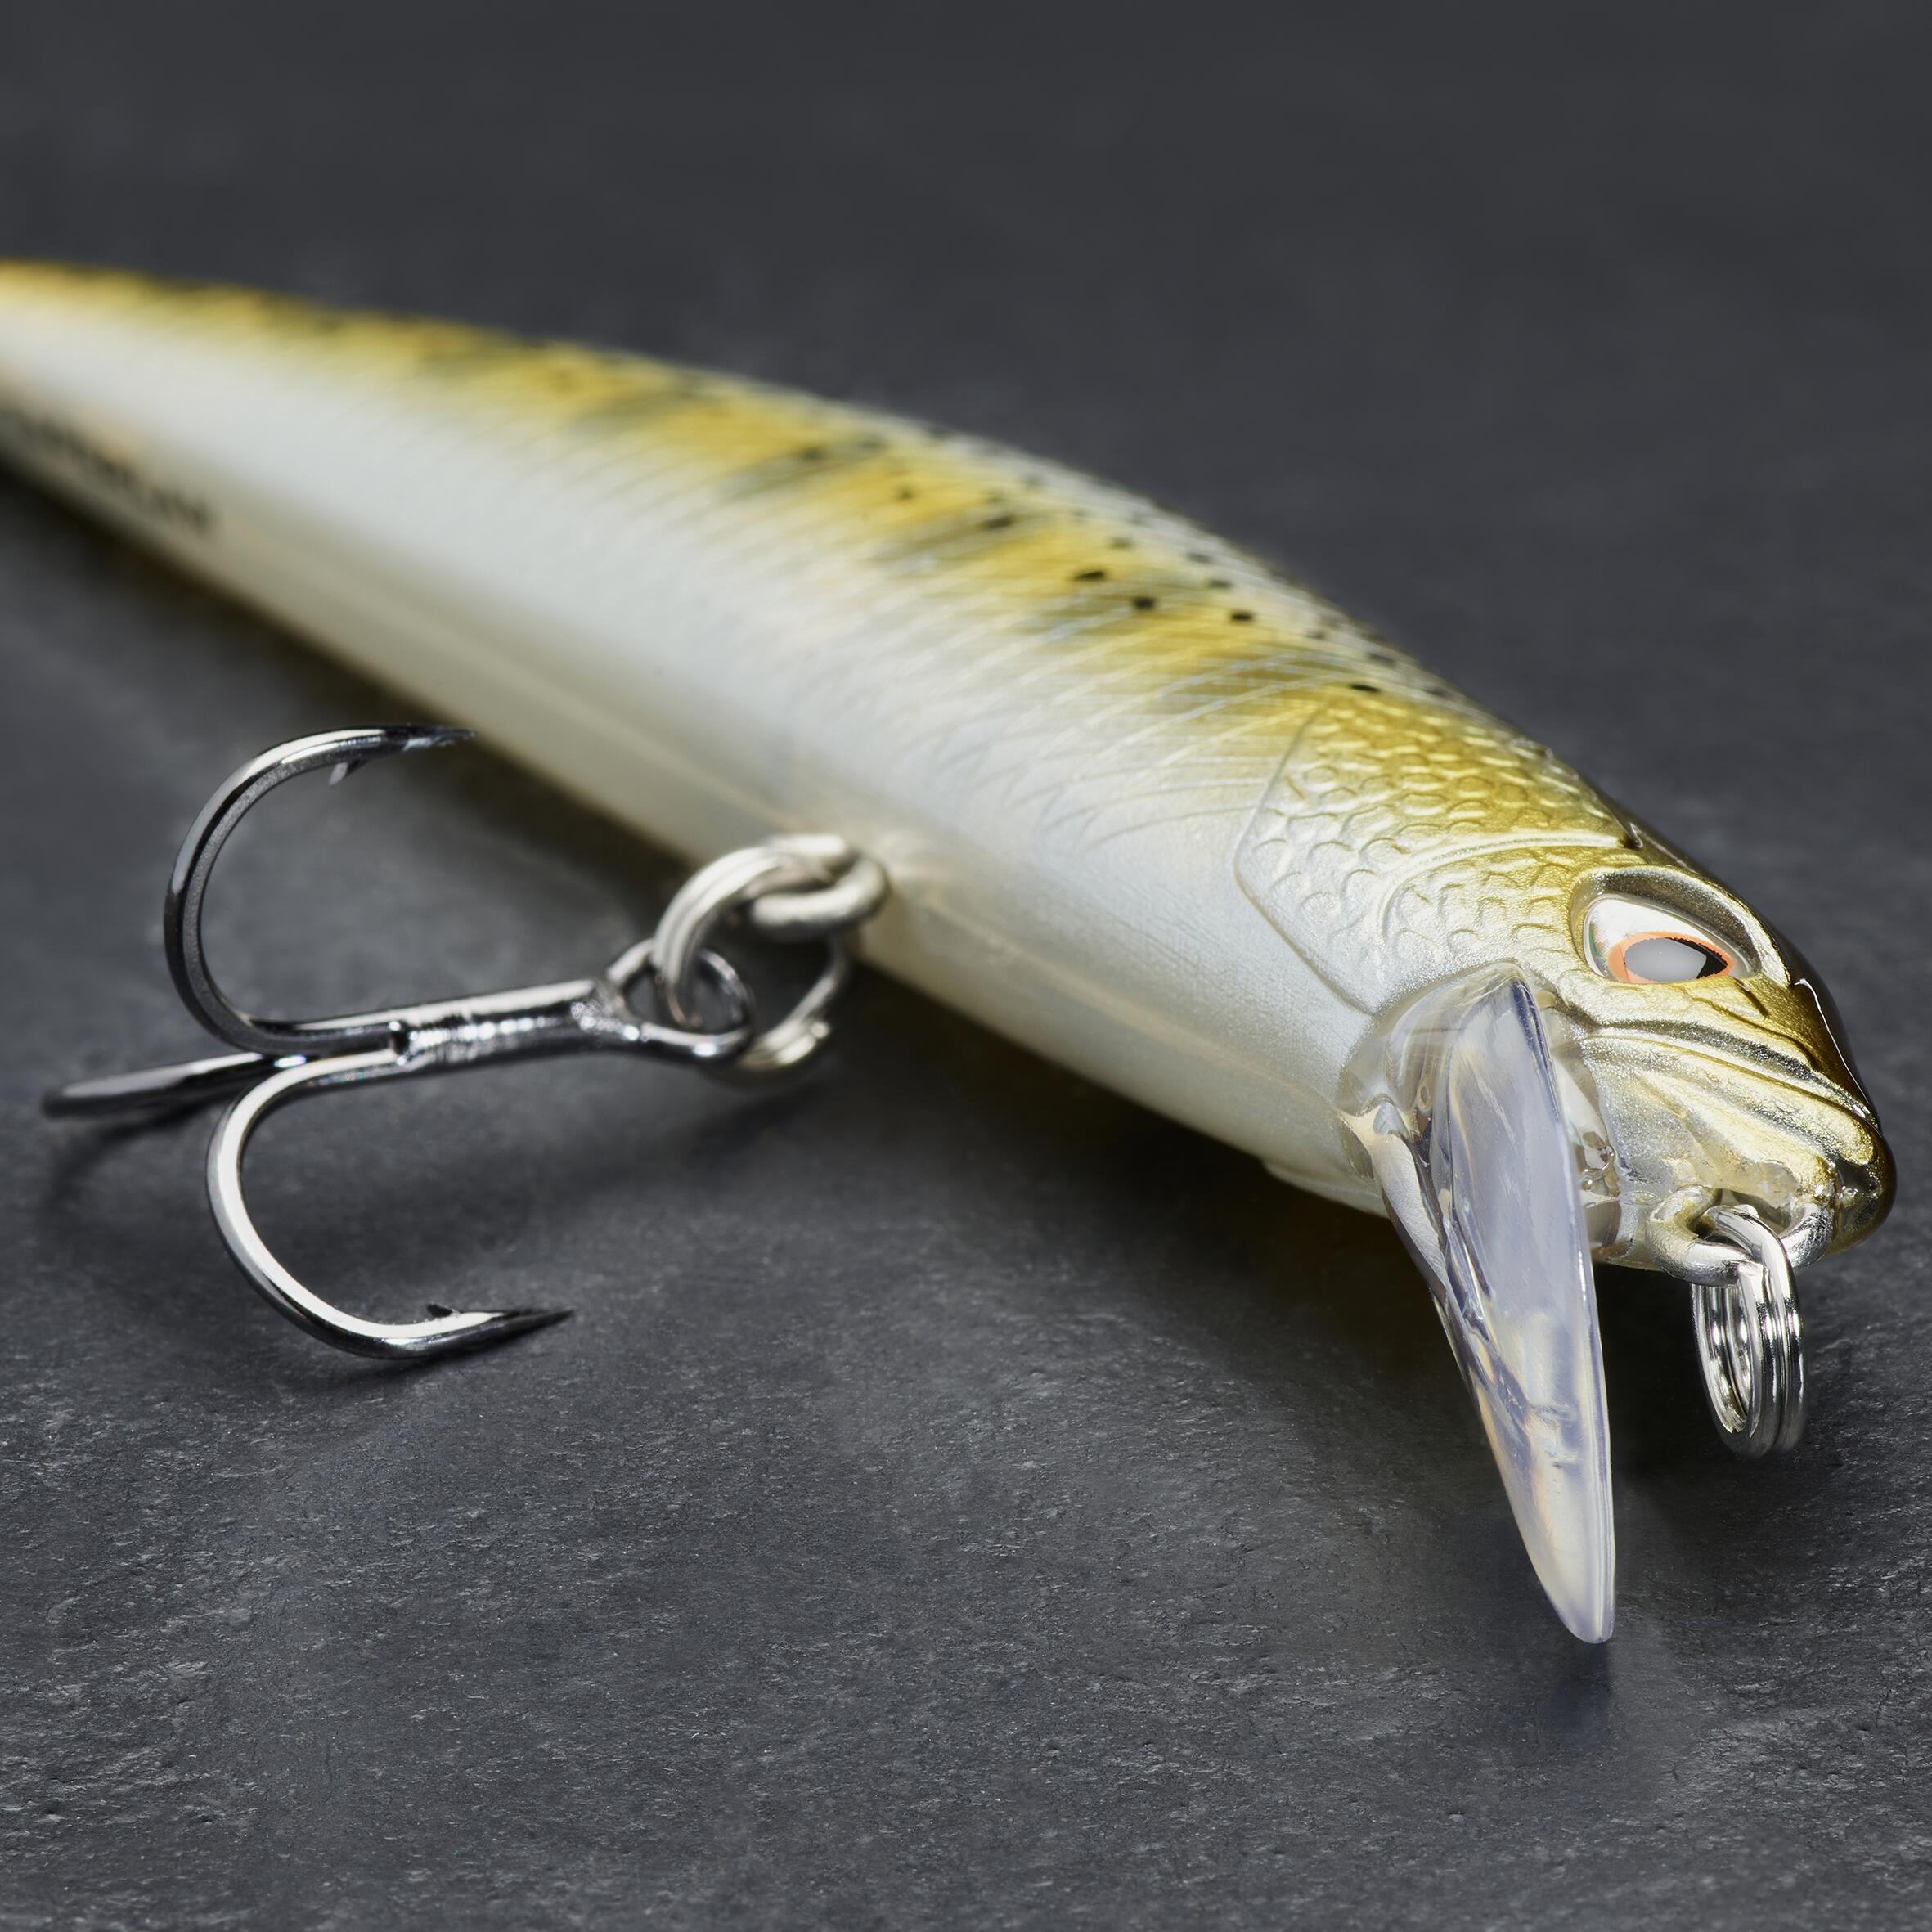 MINNOW HARD LURE FOR TROUT WXM MNWFS 70 US YAMAME - BROWN 3/4